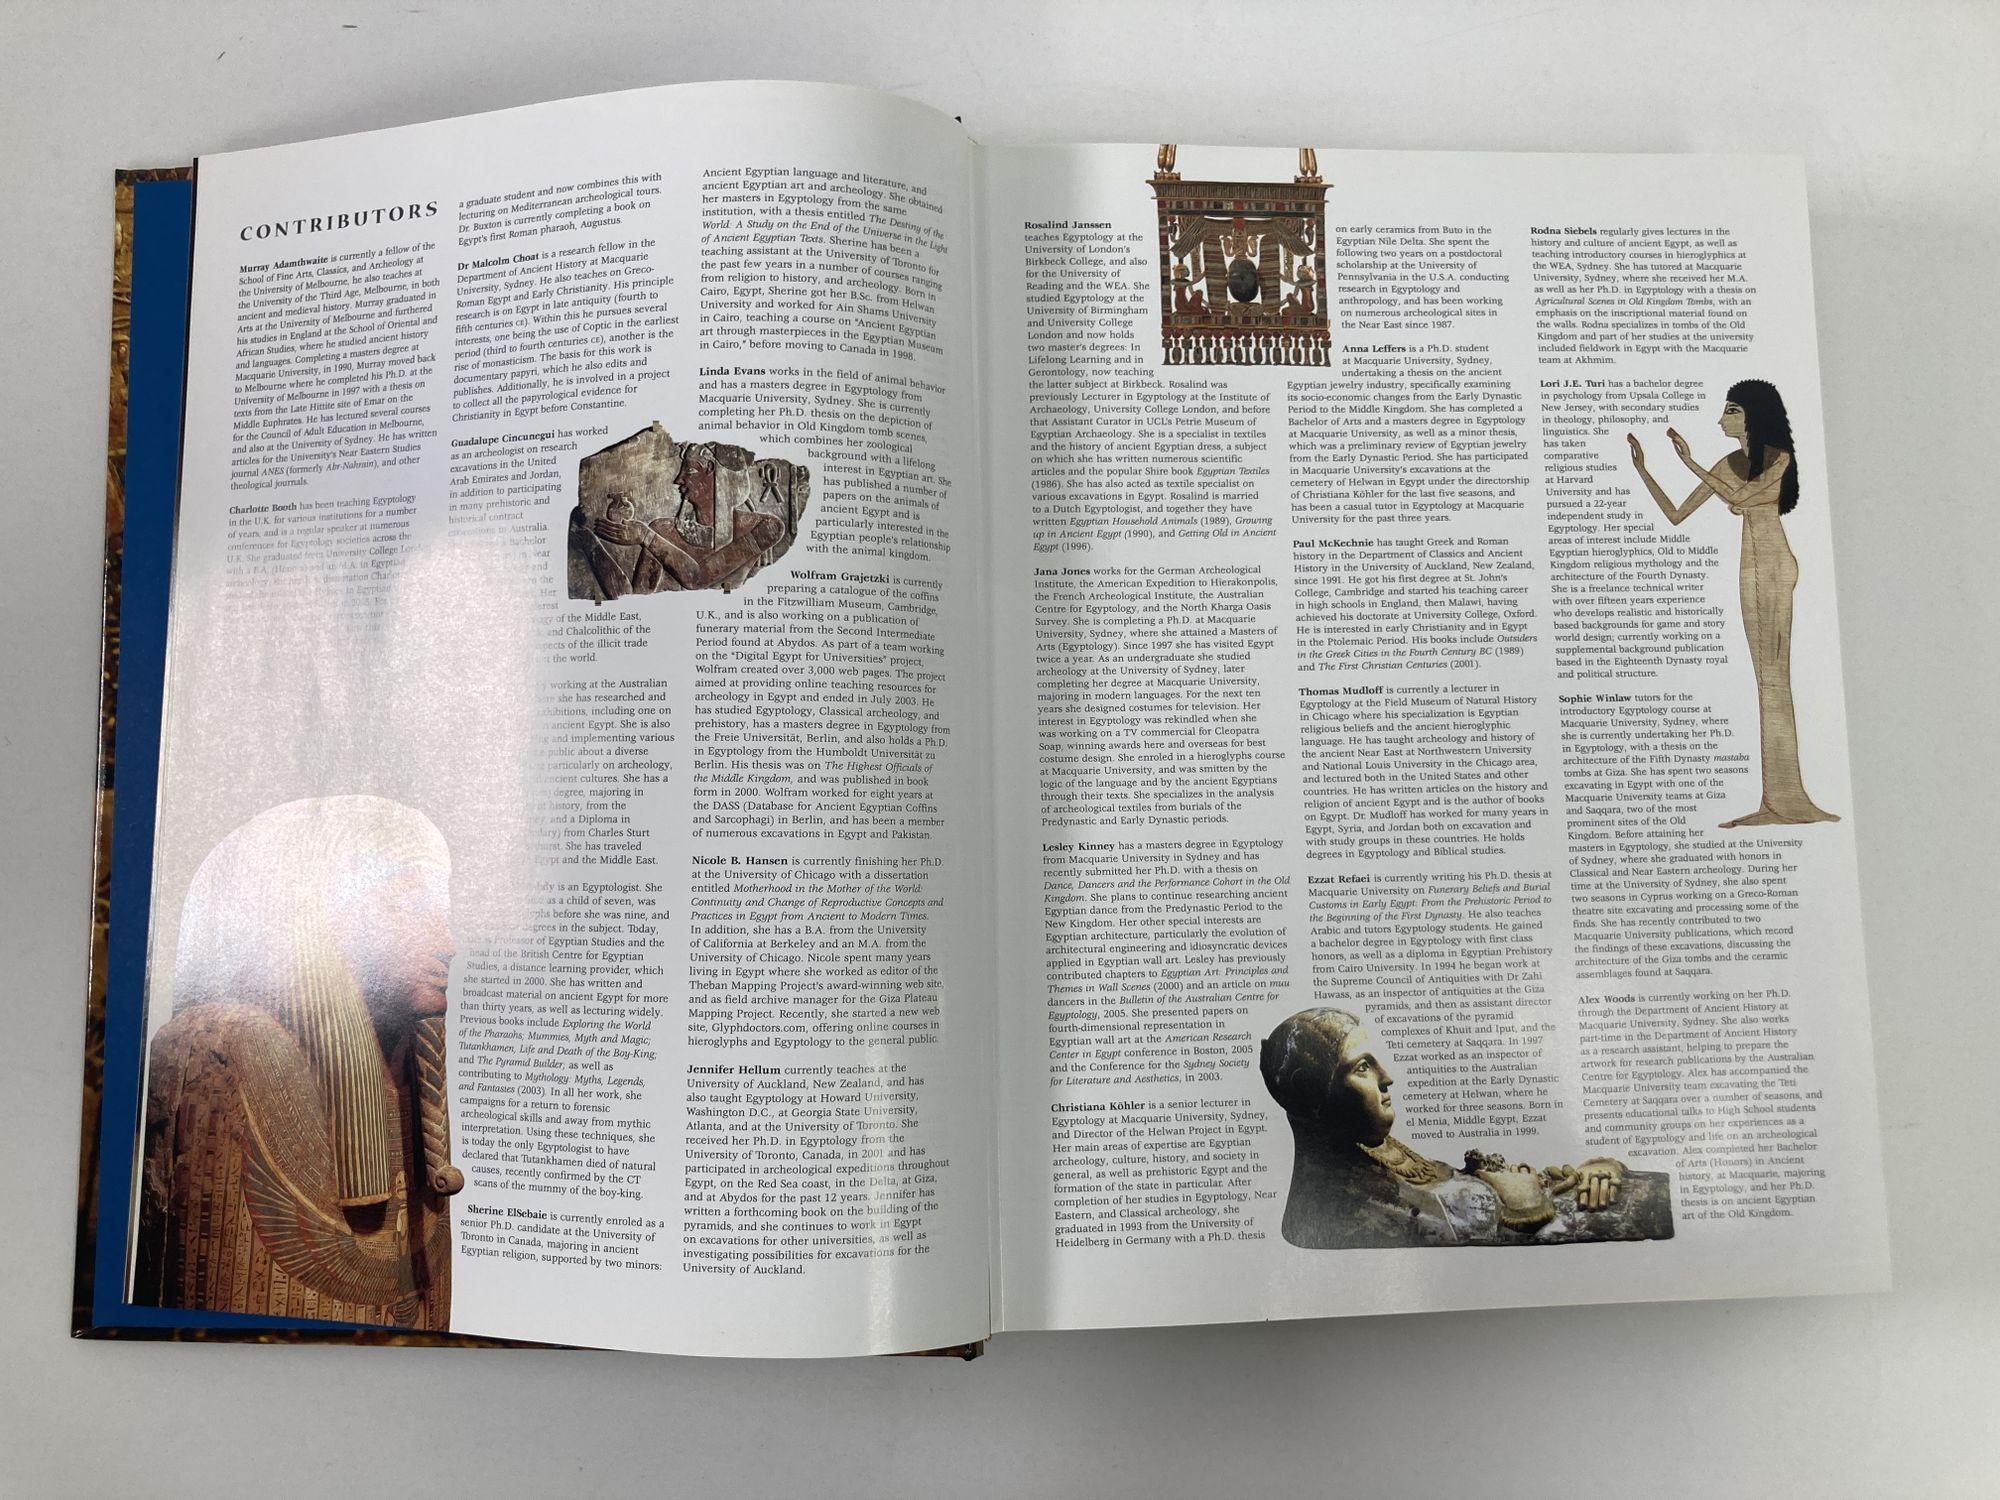 Paper Egypt: Land and Lives of the Pharaohs Revealed Hardcover Book by Cheryl Perry For Sale